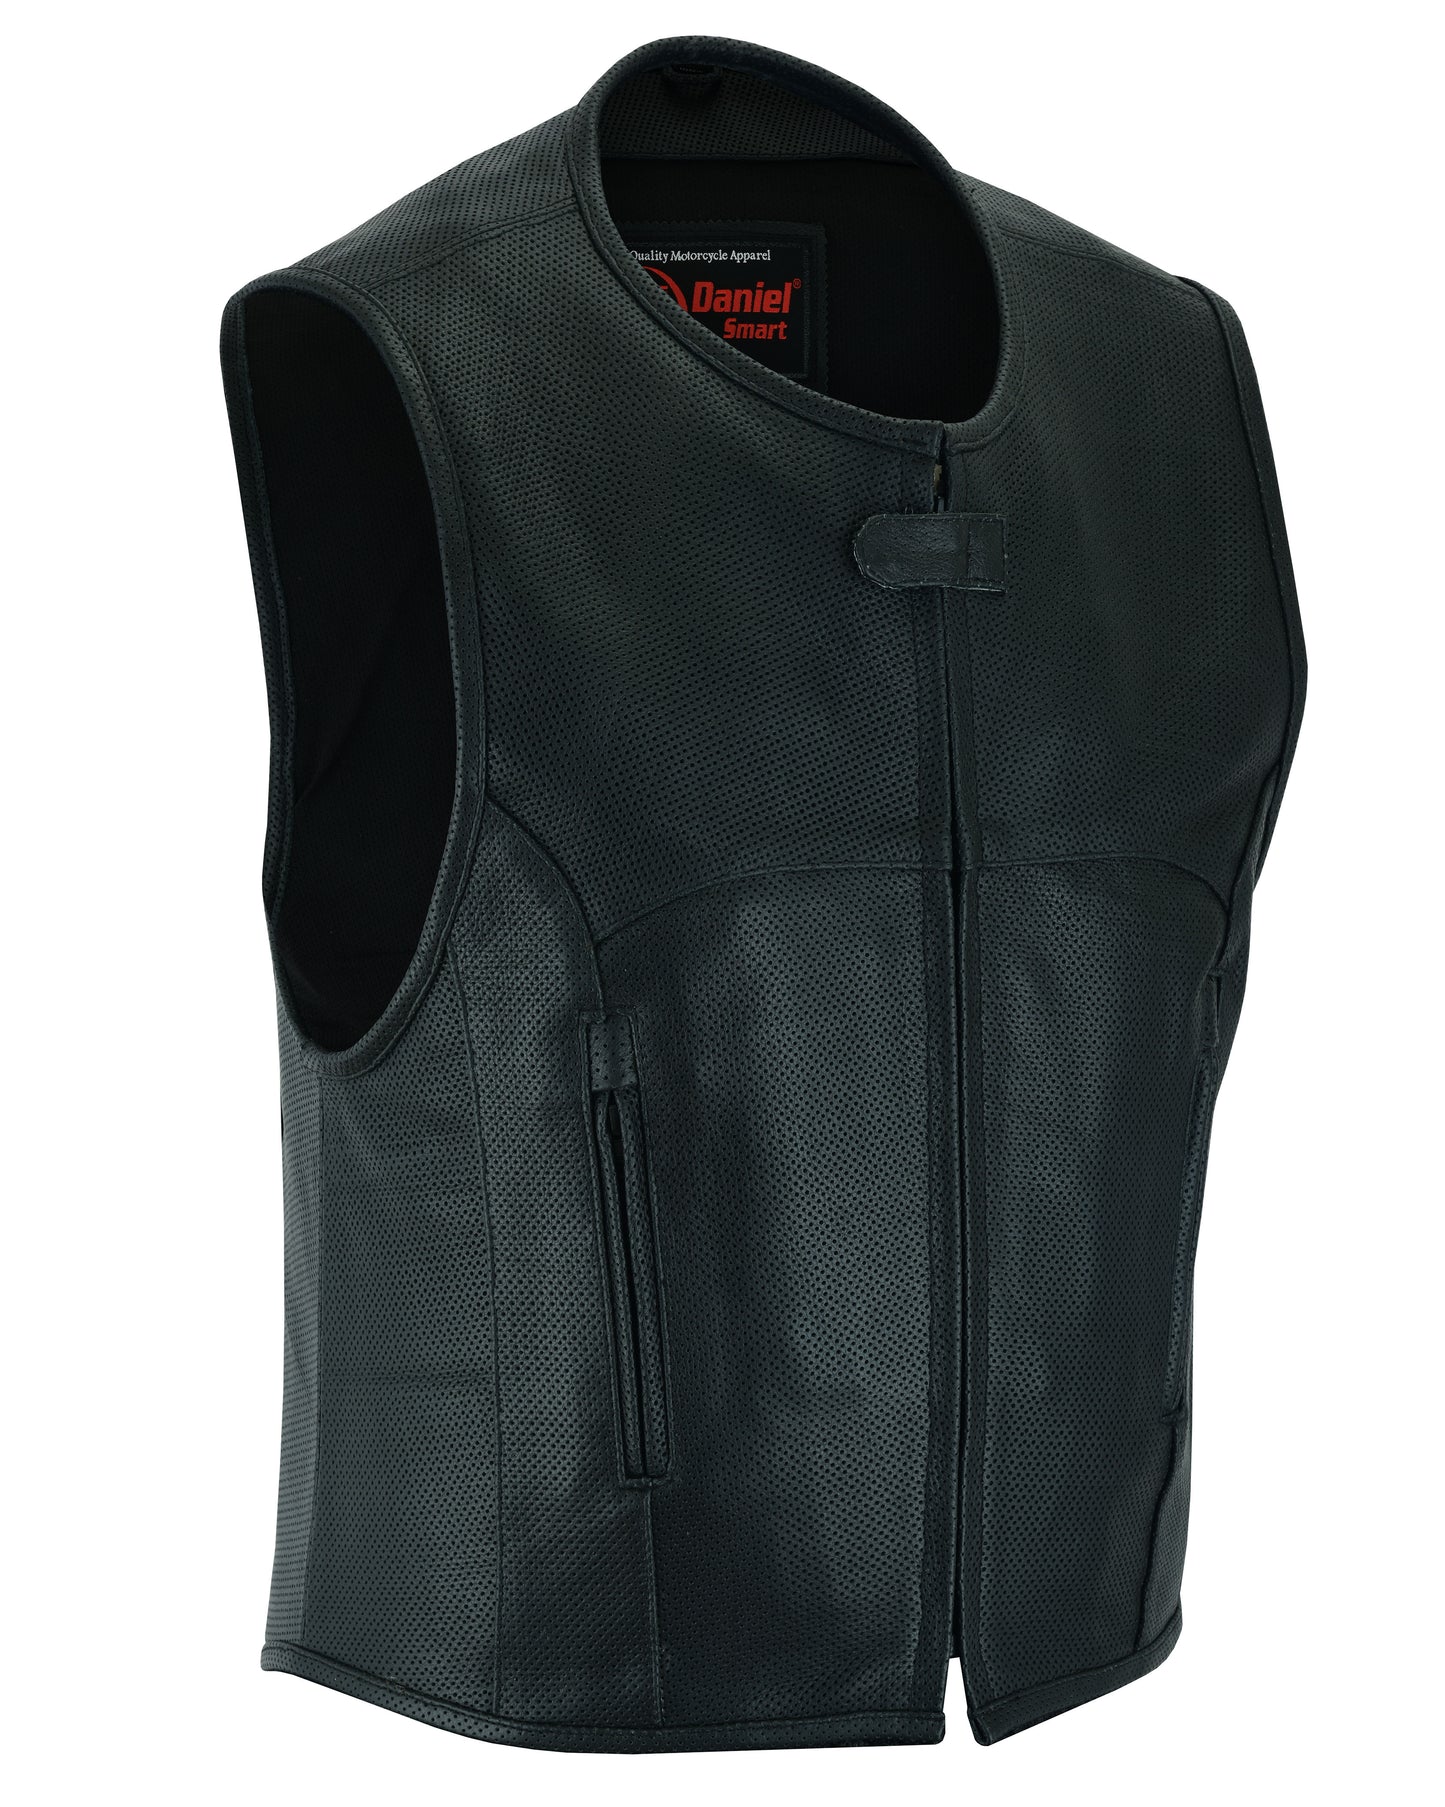 DS004 Men's Updated Perforated SWAT Team Style Vest